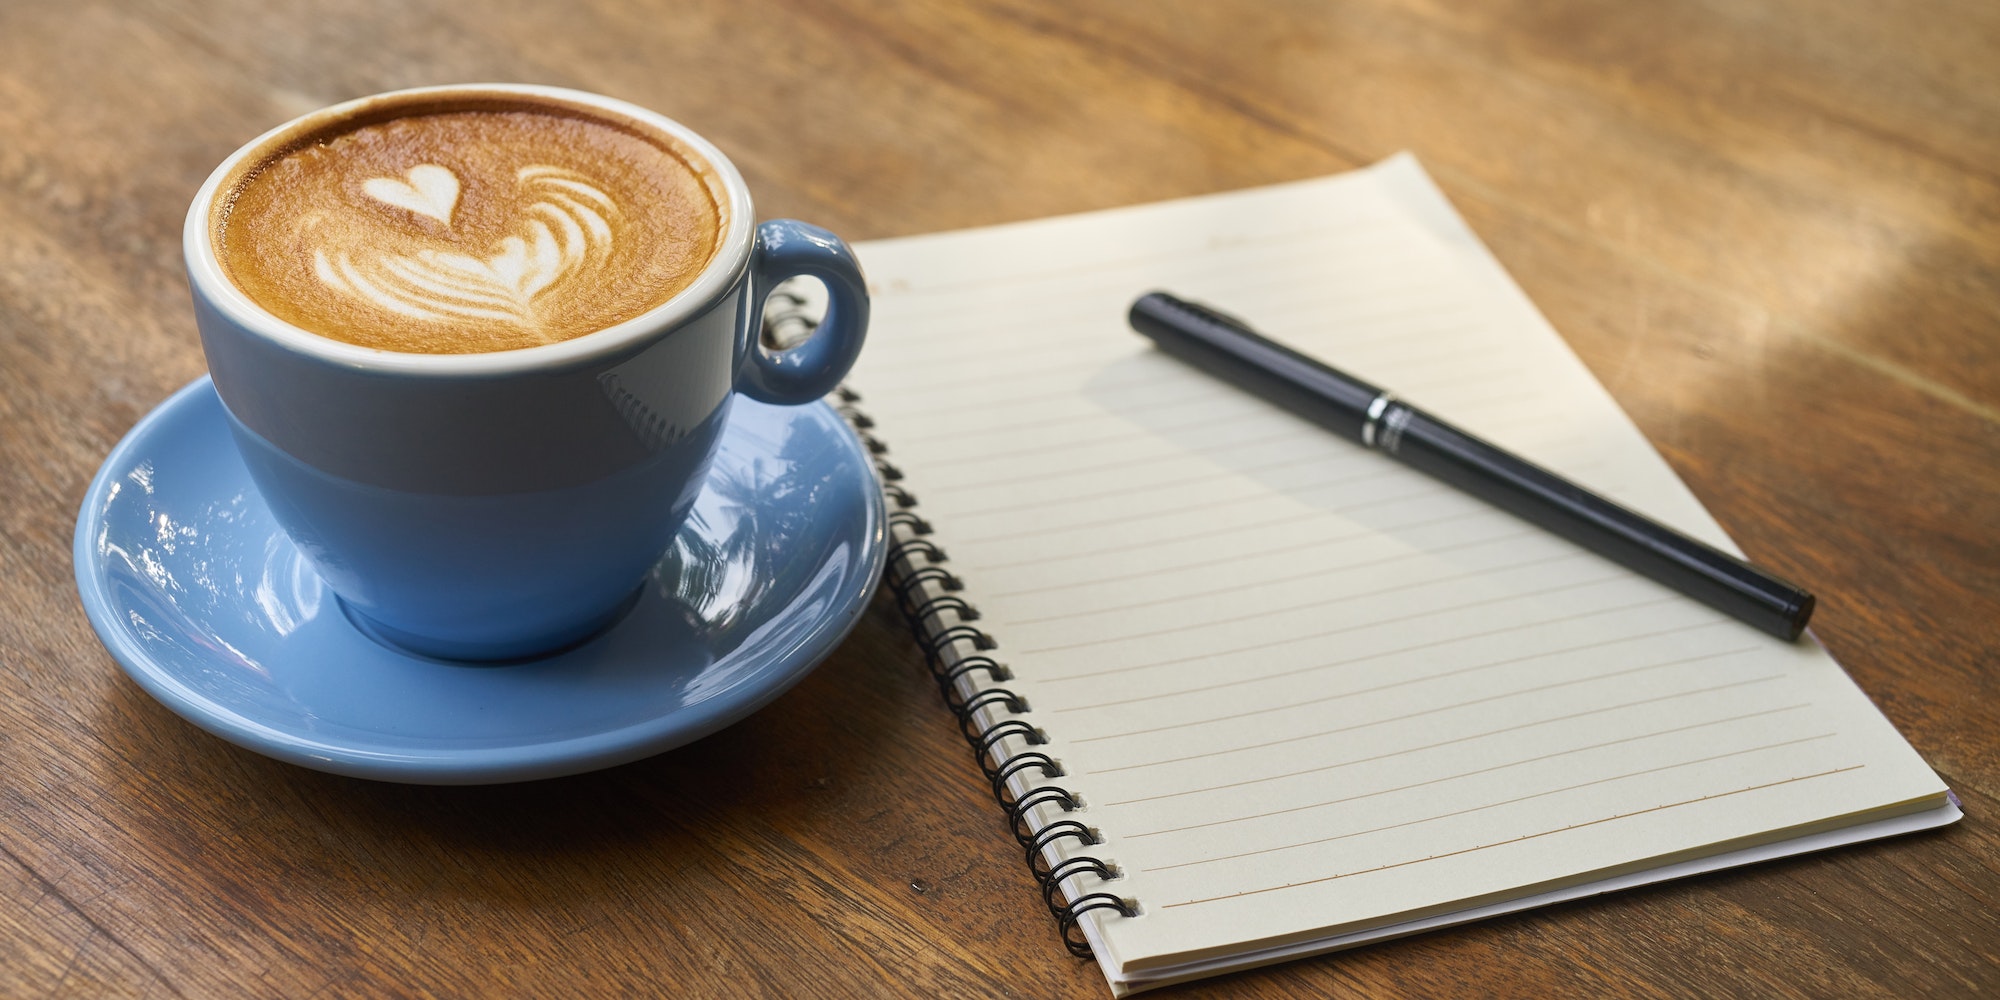 blue coffee cup with foam art heart beside a notebook and pen - Photo by Pixabay: https://www.pexels.com/photo/beverage-blue-breakfast-brown-414551/